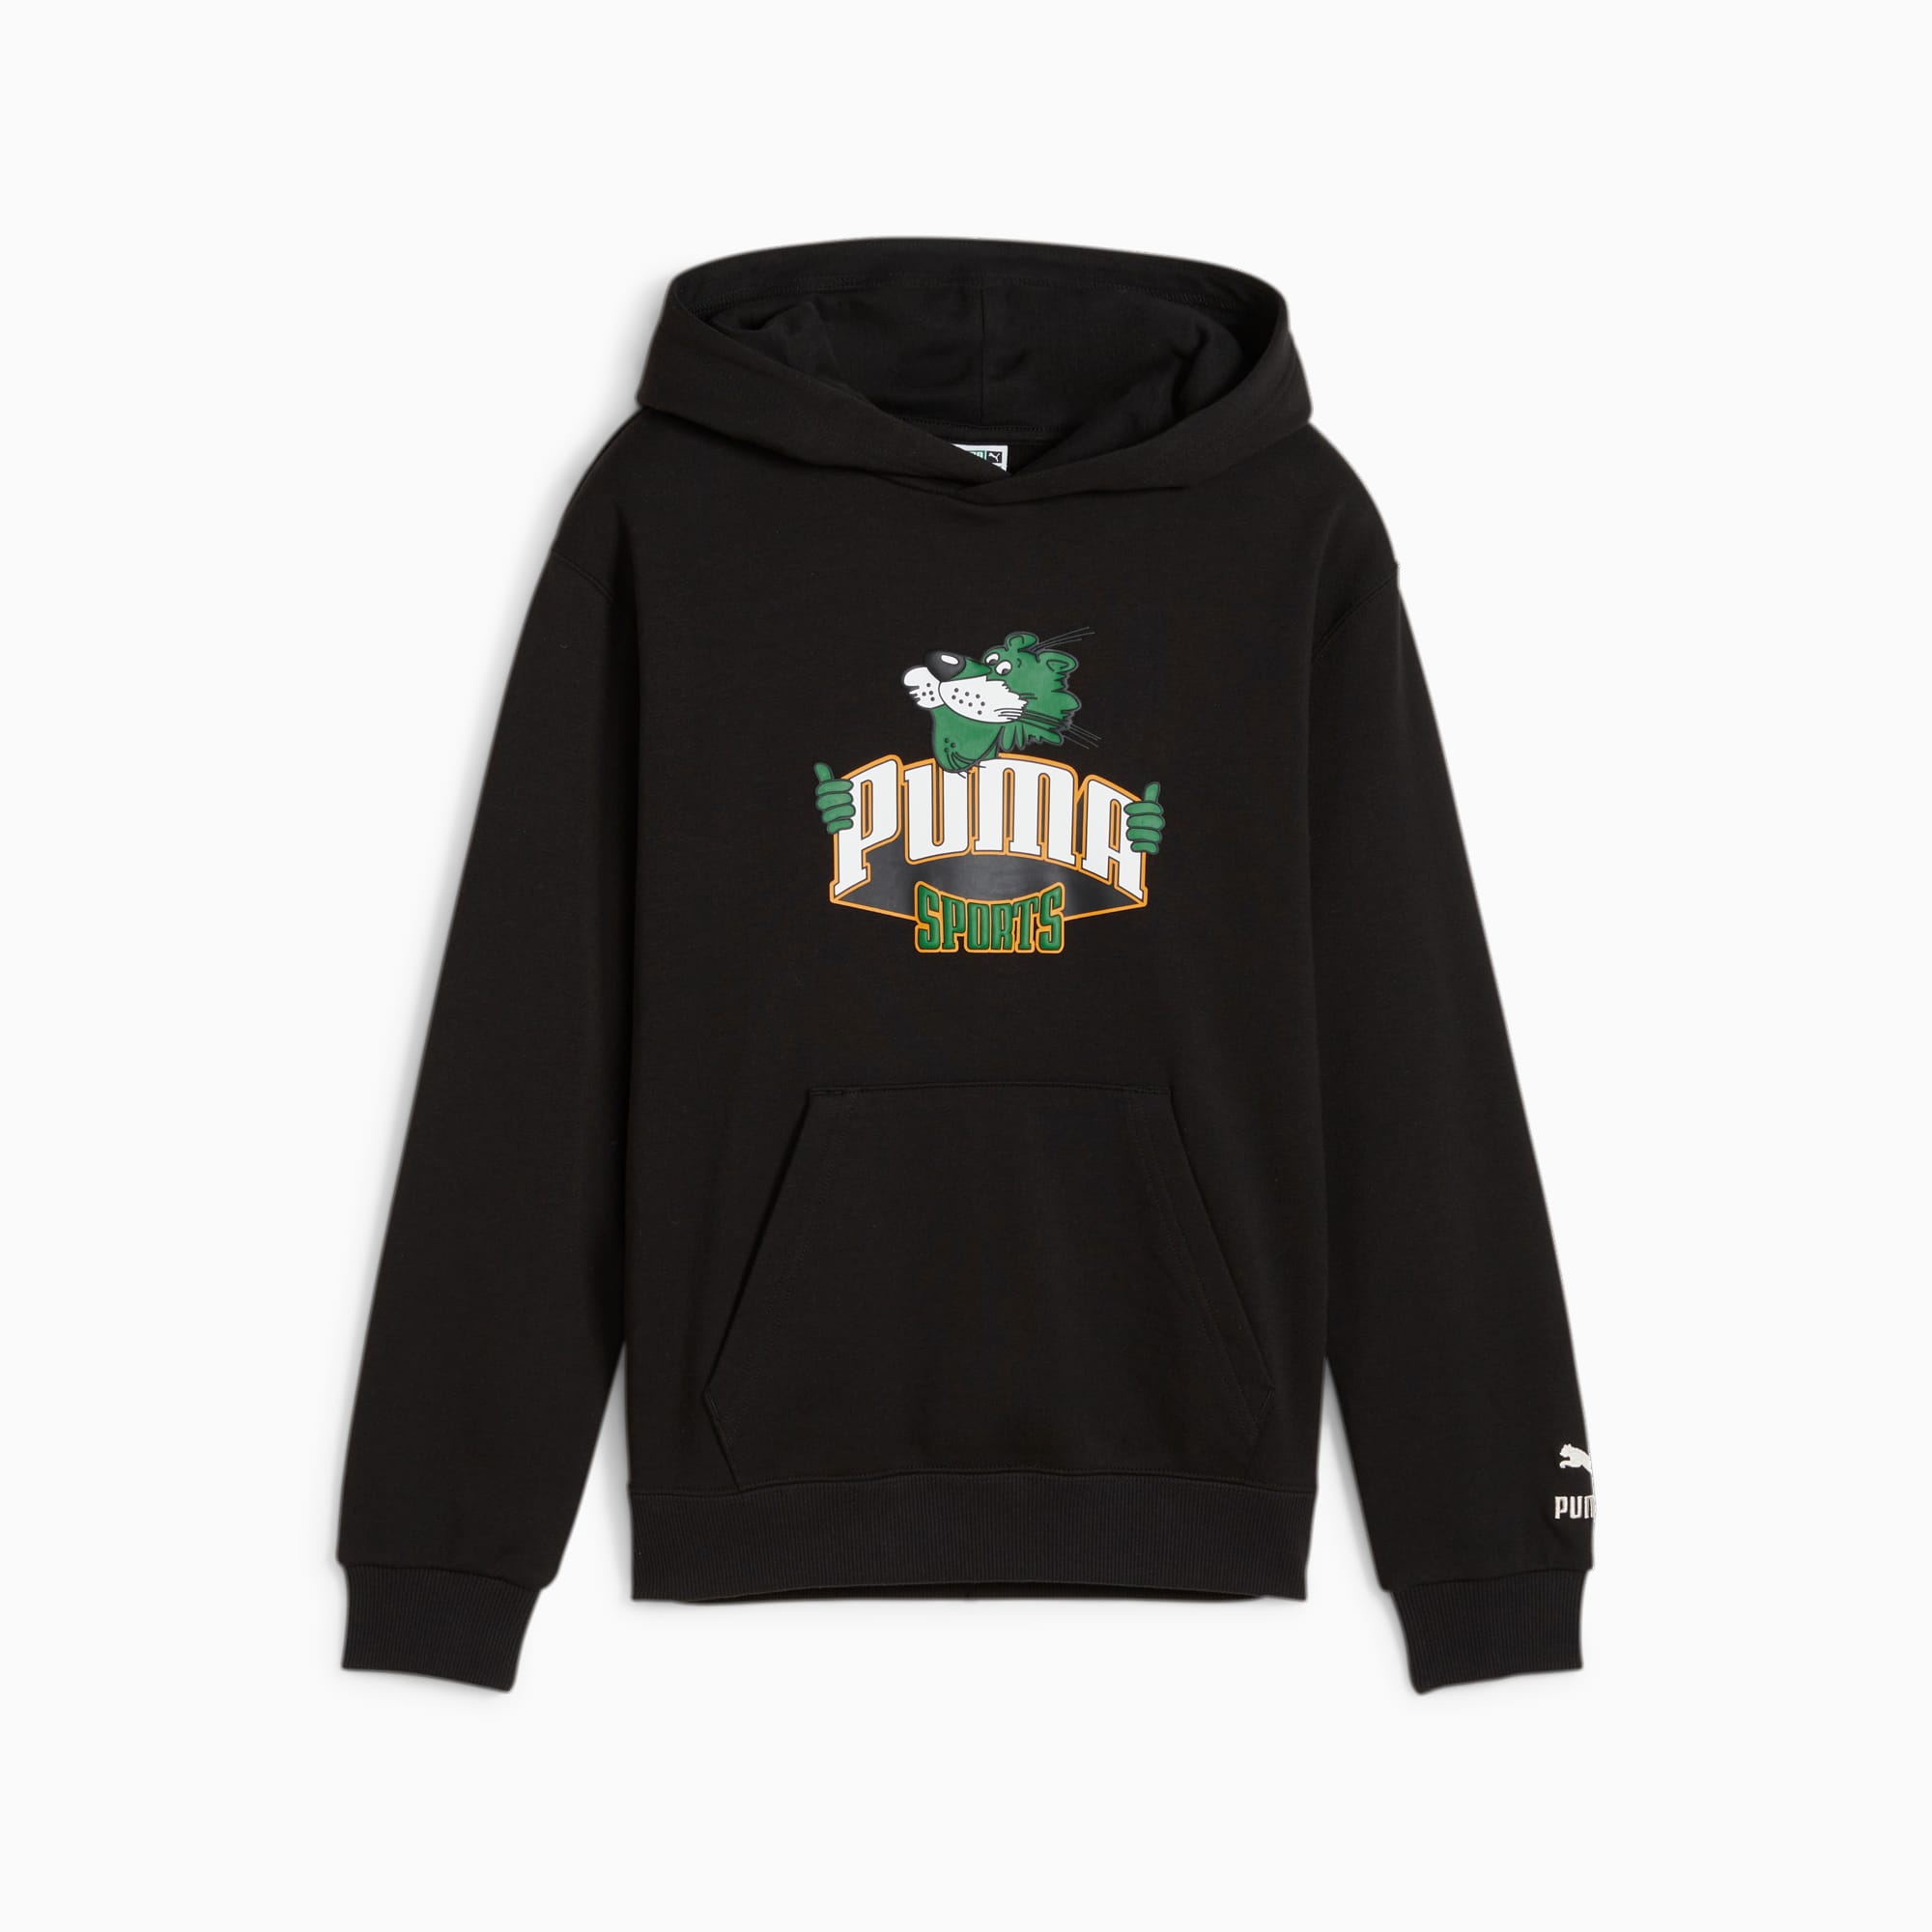 PUMA For The Fanbase Youth Hoodie, Black, Size 128, Clothing